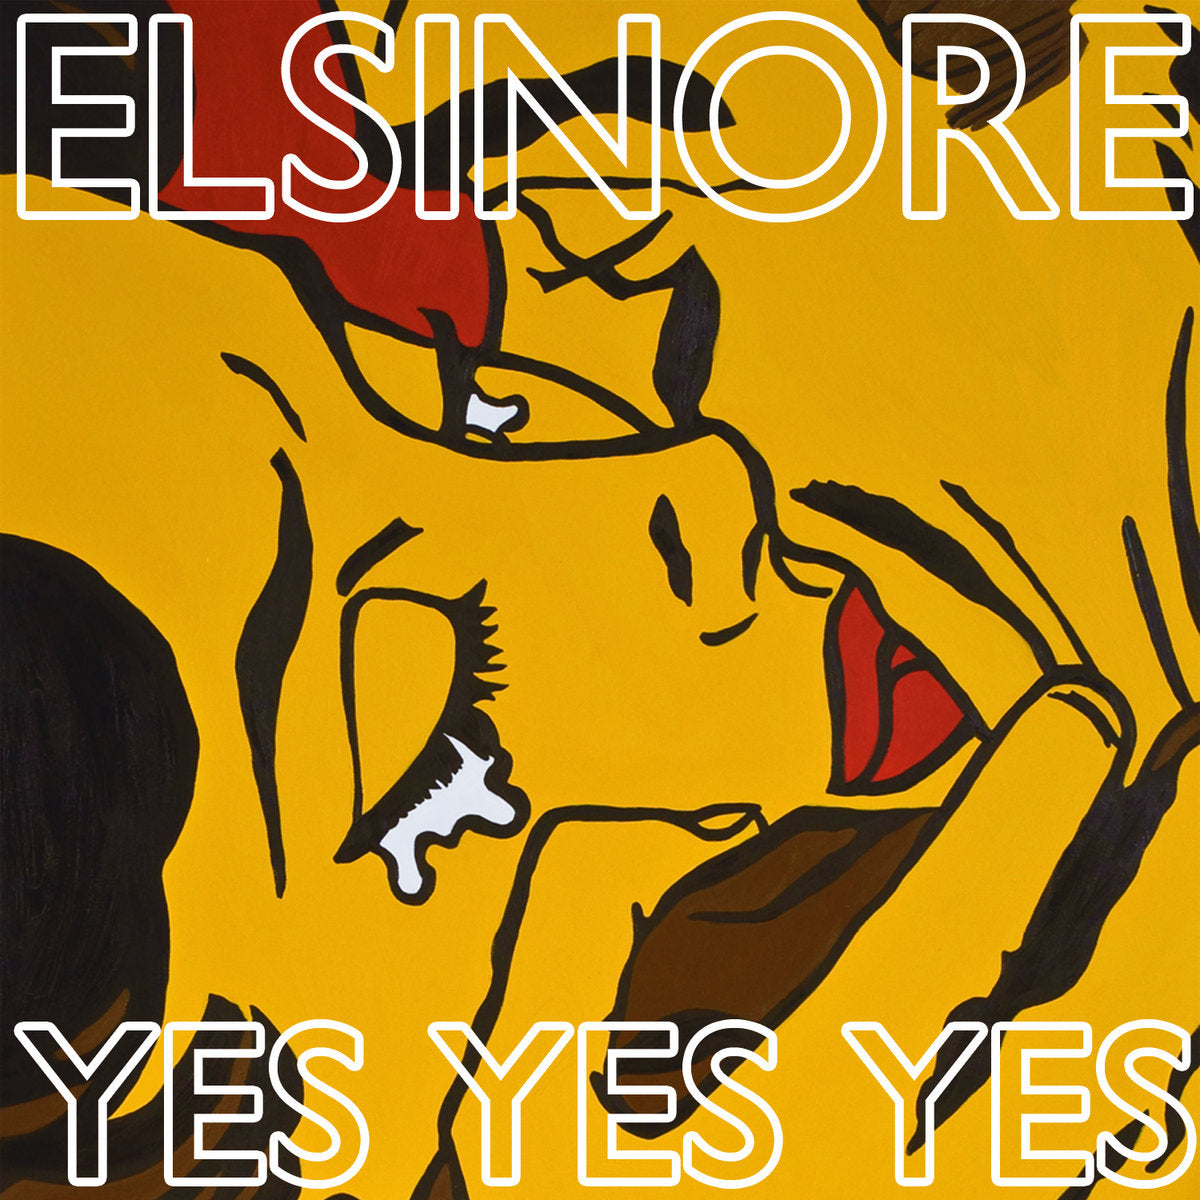 Elsinore - Yes Yes Yes